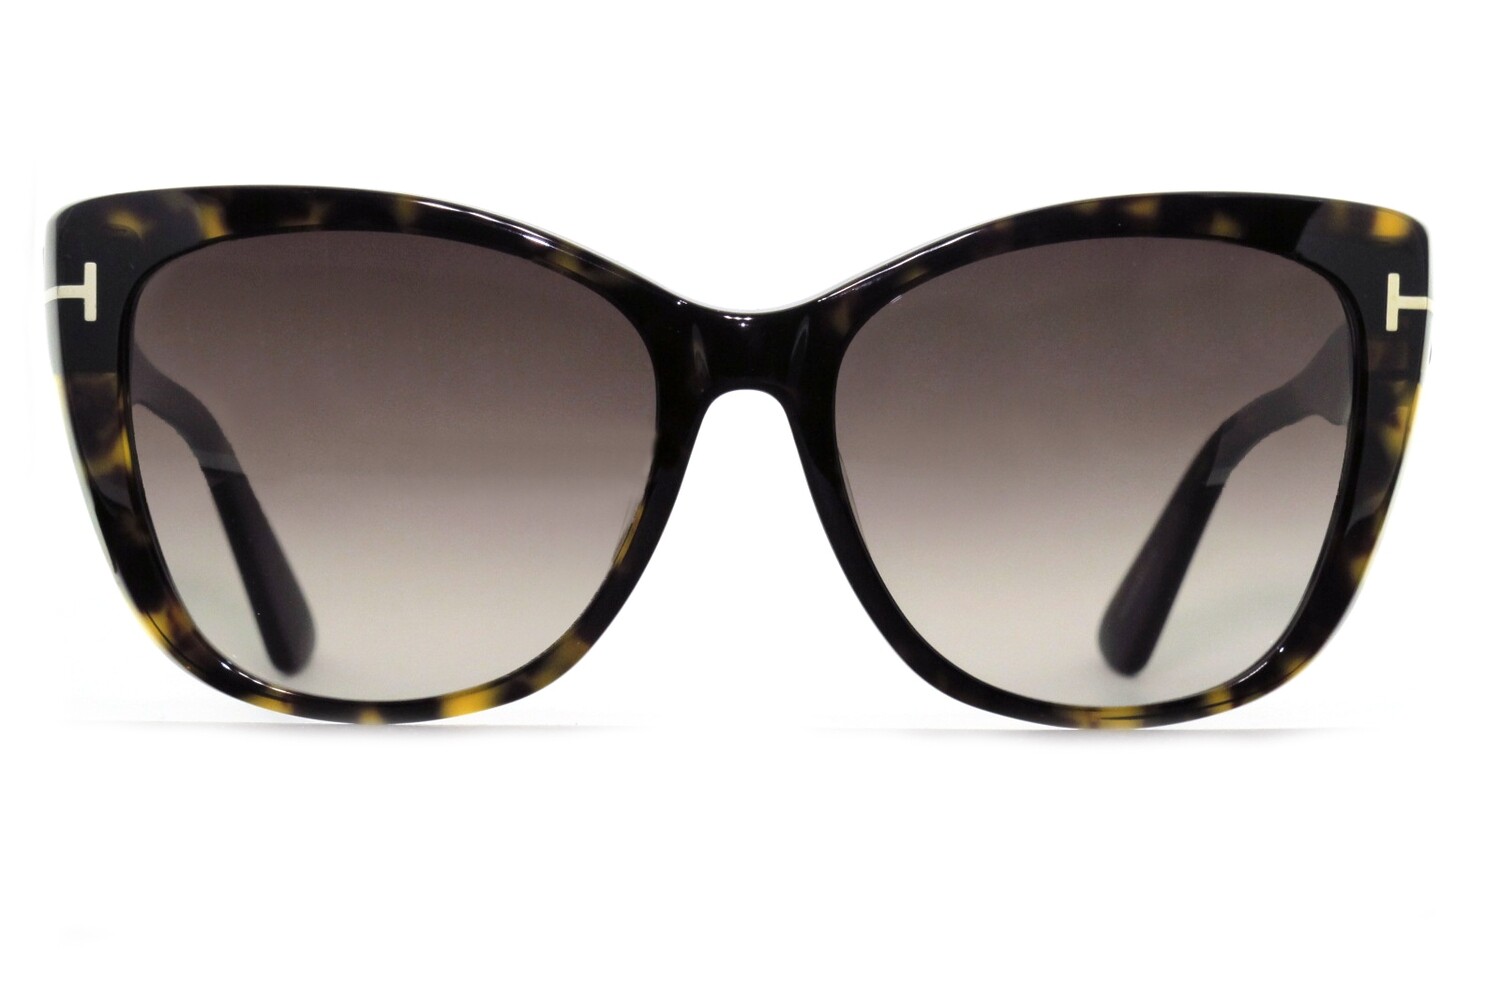 Nora TF937 by Tom Ford